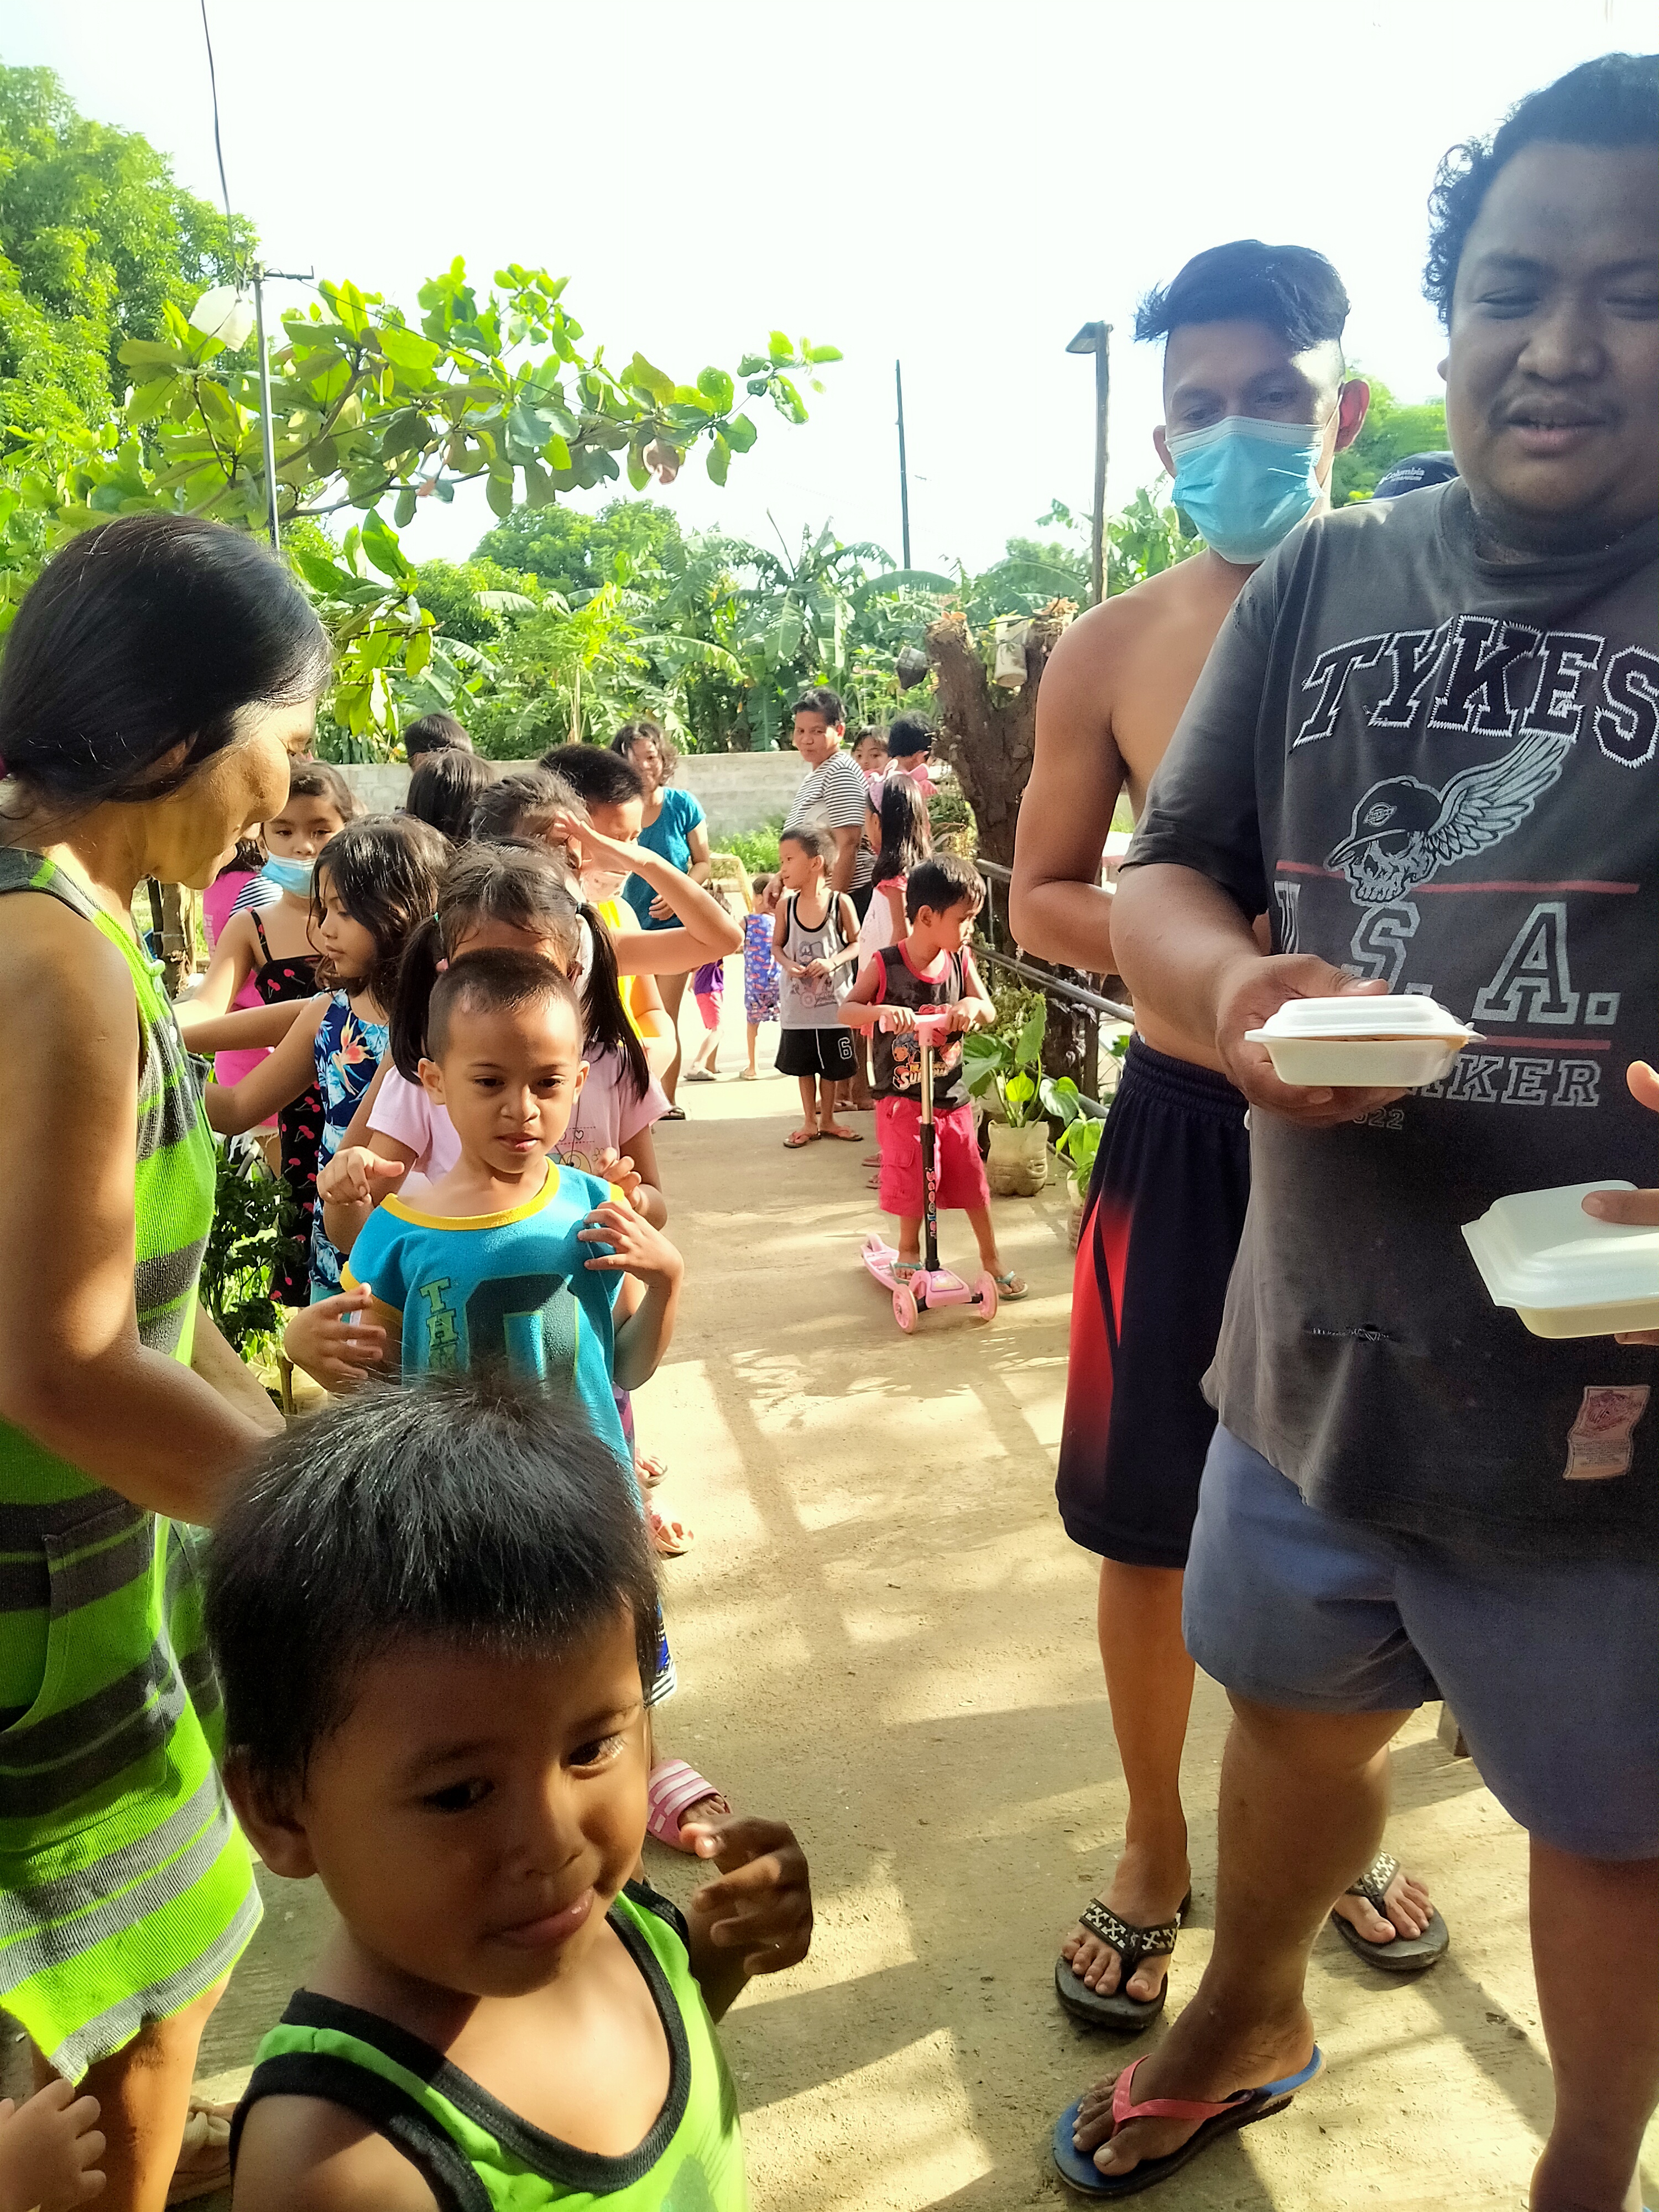 A.G. AIZO - "With hands stretched out to help and serve, Avocadians and volunteers organized a community feeding activity for the children of Brgy. Ampid, San Mateo, Rizal - filling empty stomachs and warming grateful hearts. "